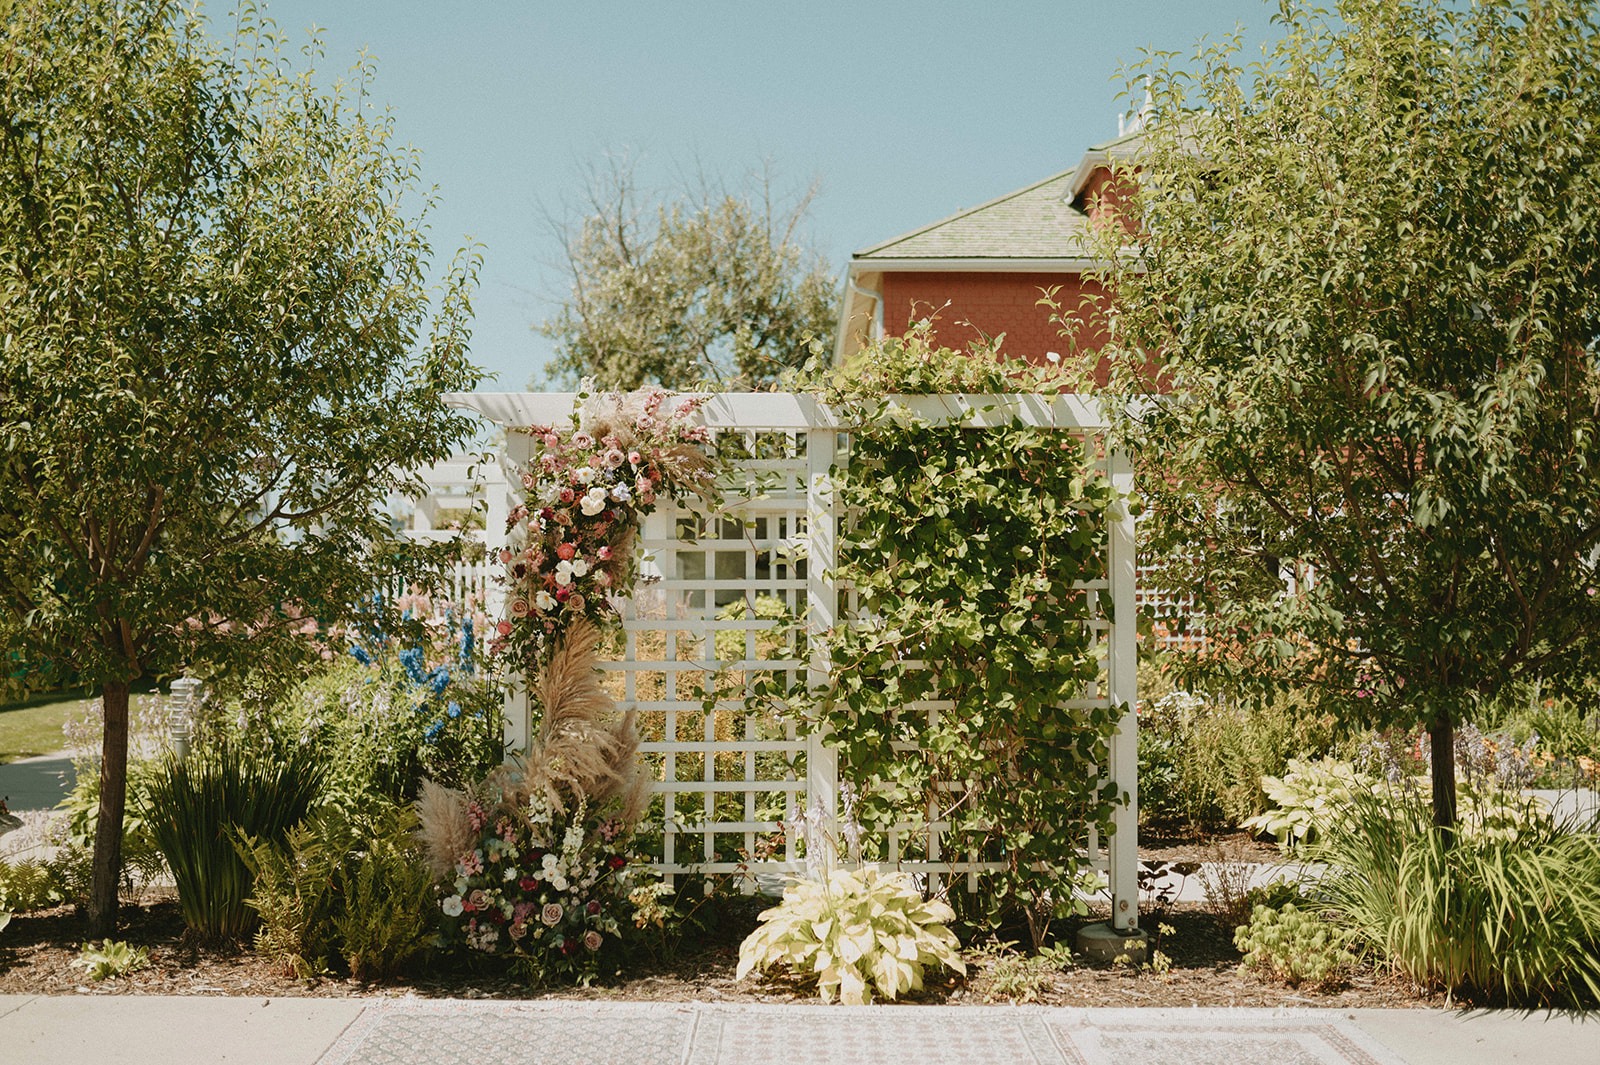 Summer wedding inspiration with a floral arch for an outdoor wedding ceremony at Deane House